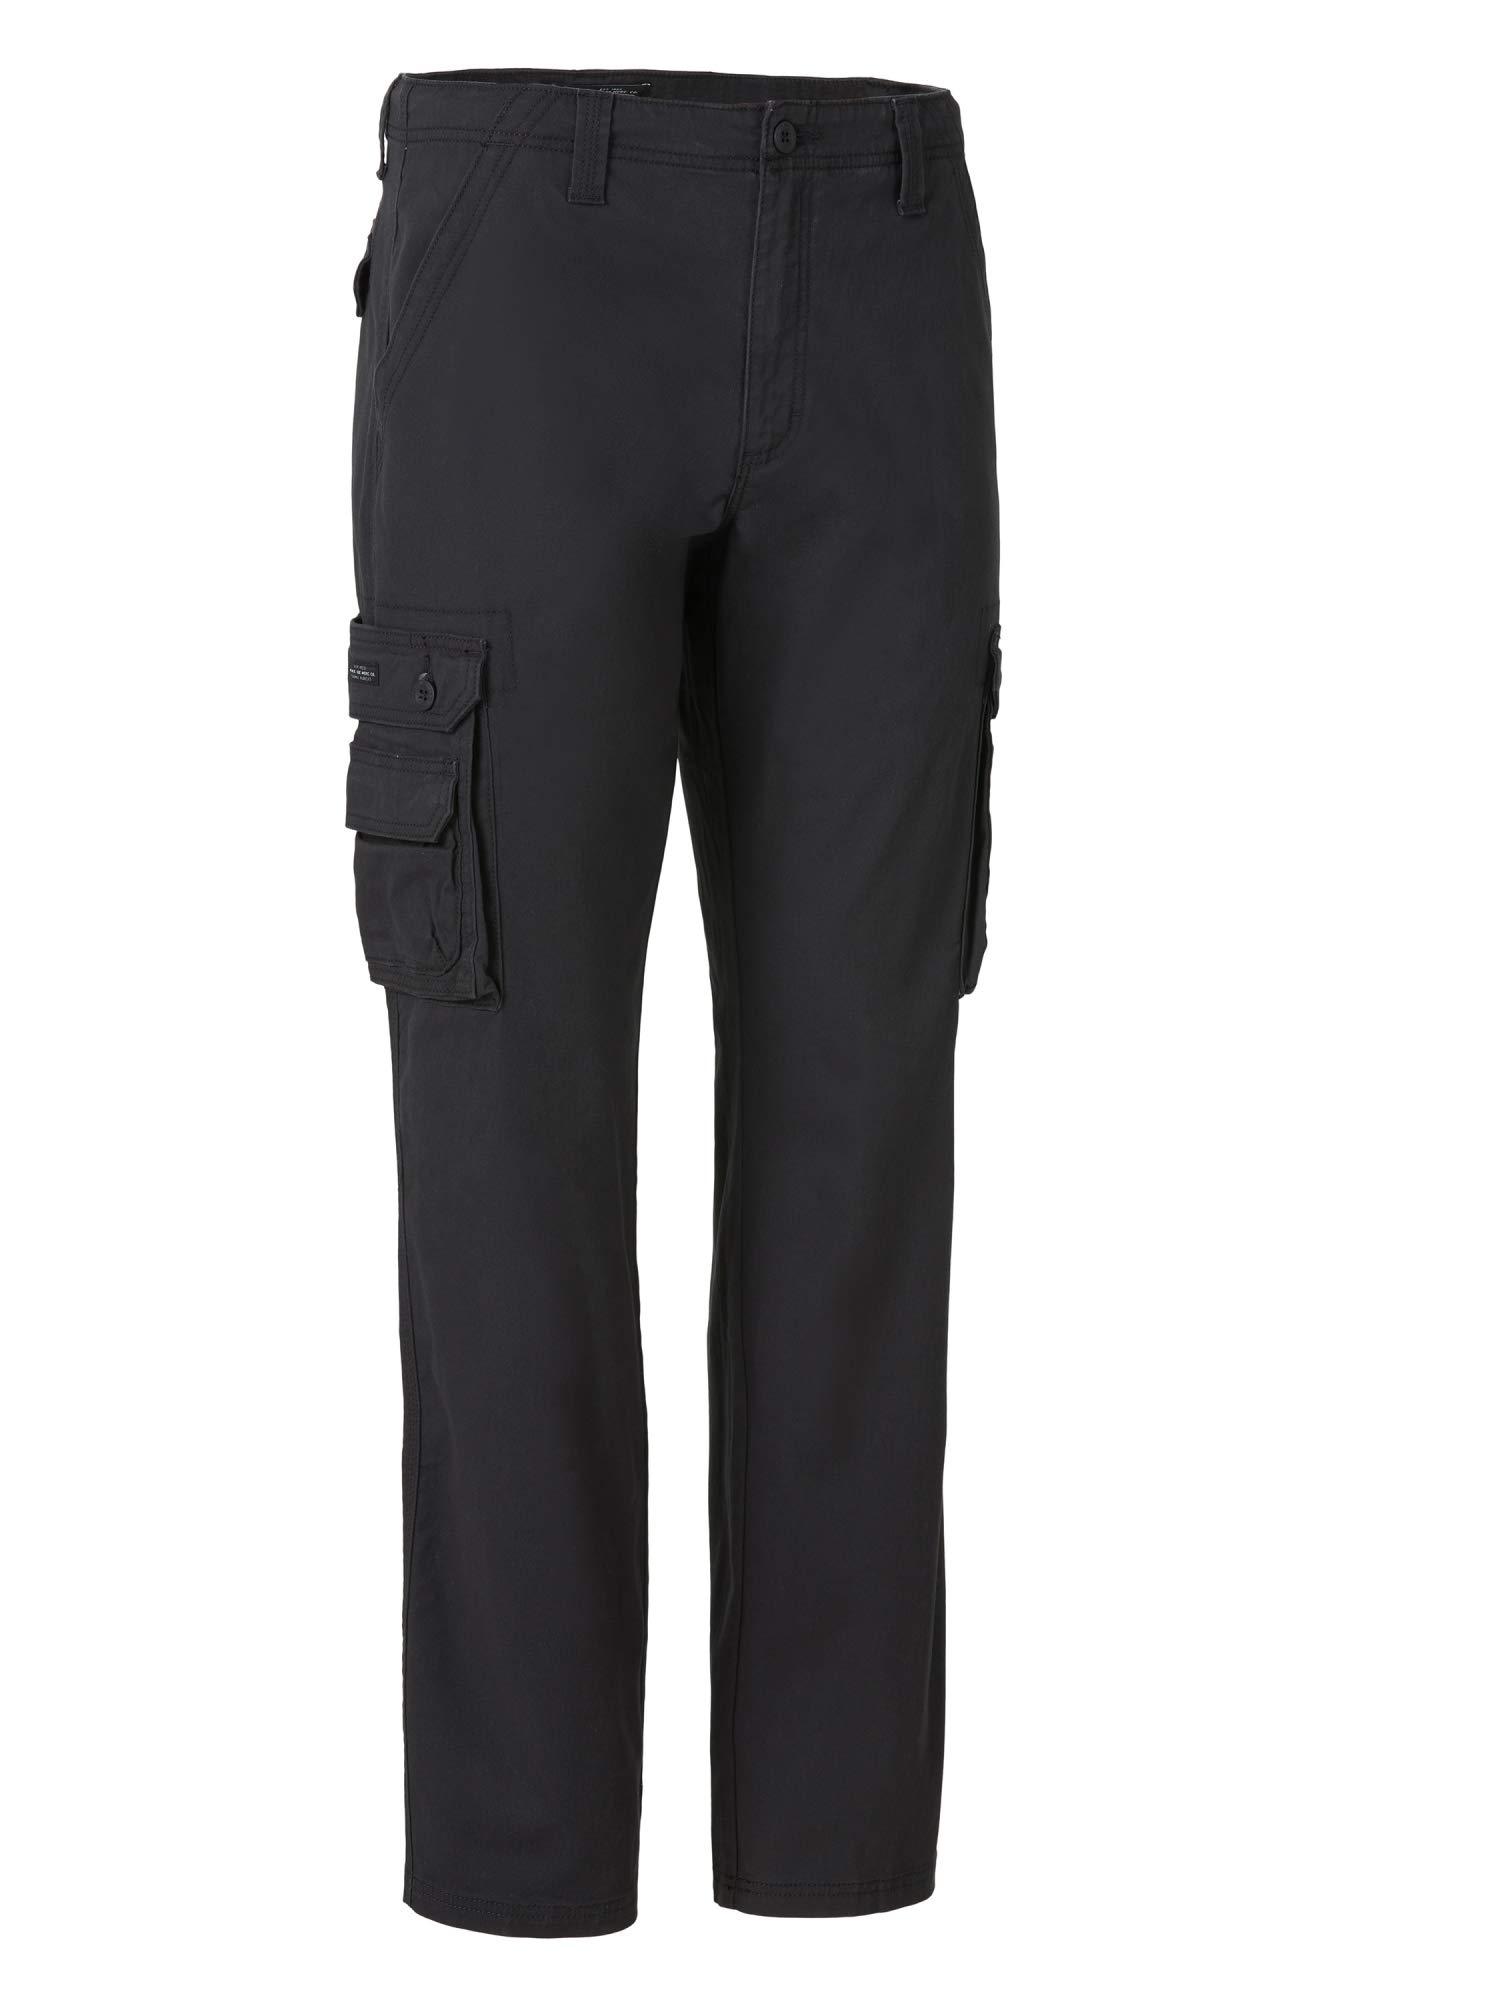 Lee Jeans Cotton Wyoming Relaxed Fit Cargo Pant in Black for Men - Lyst